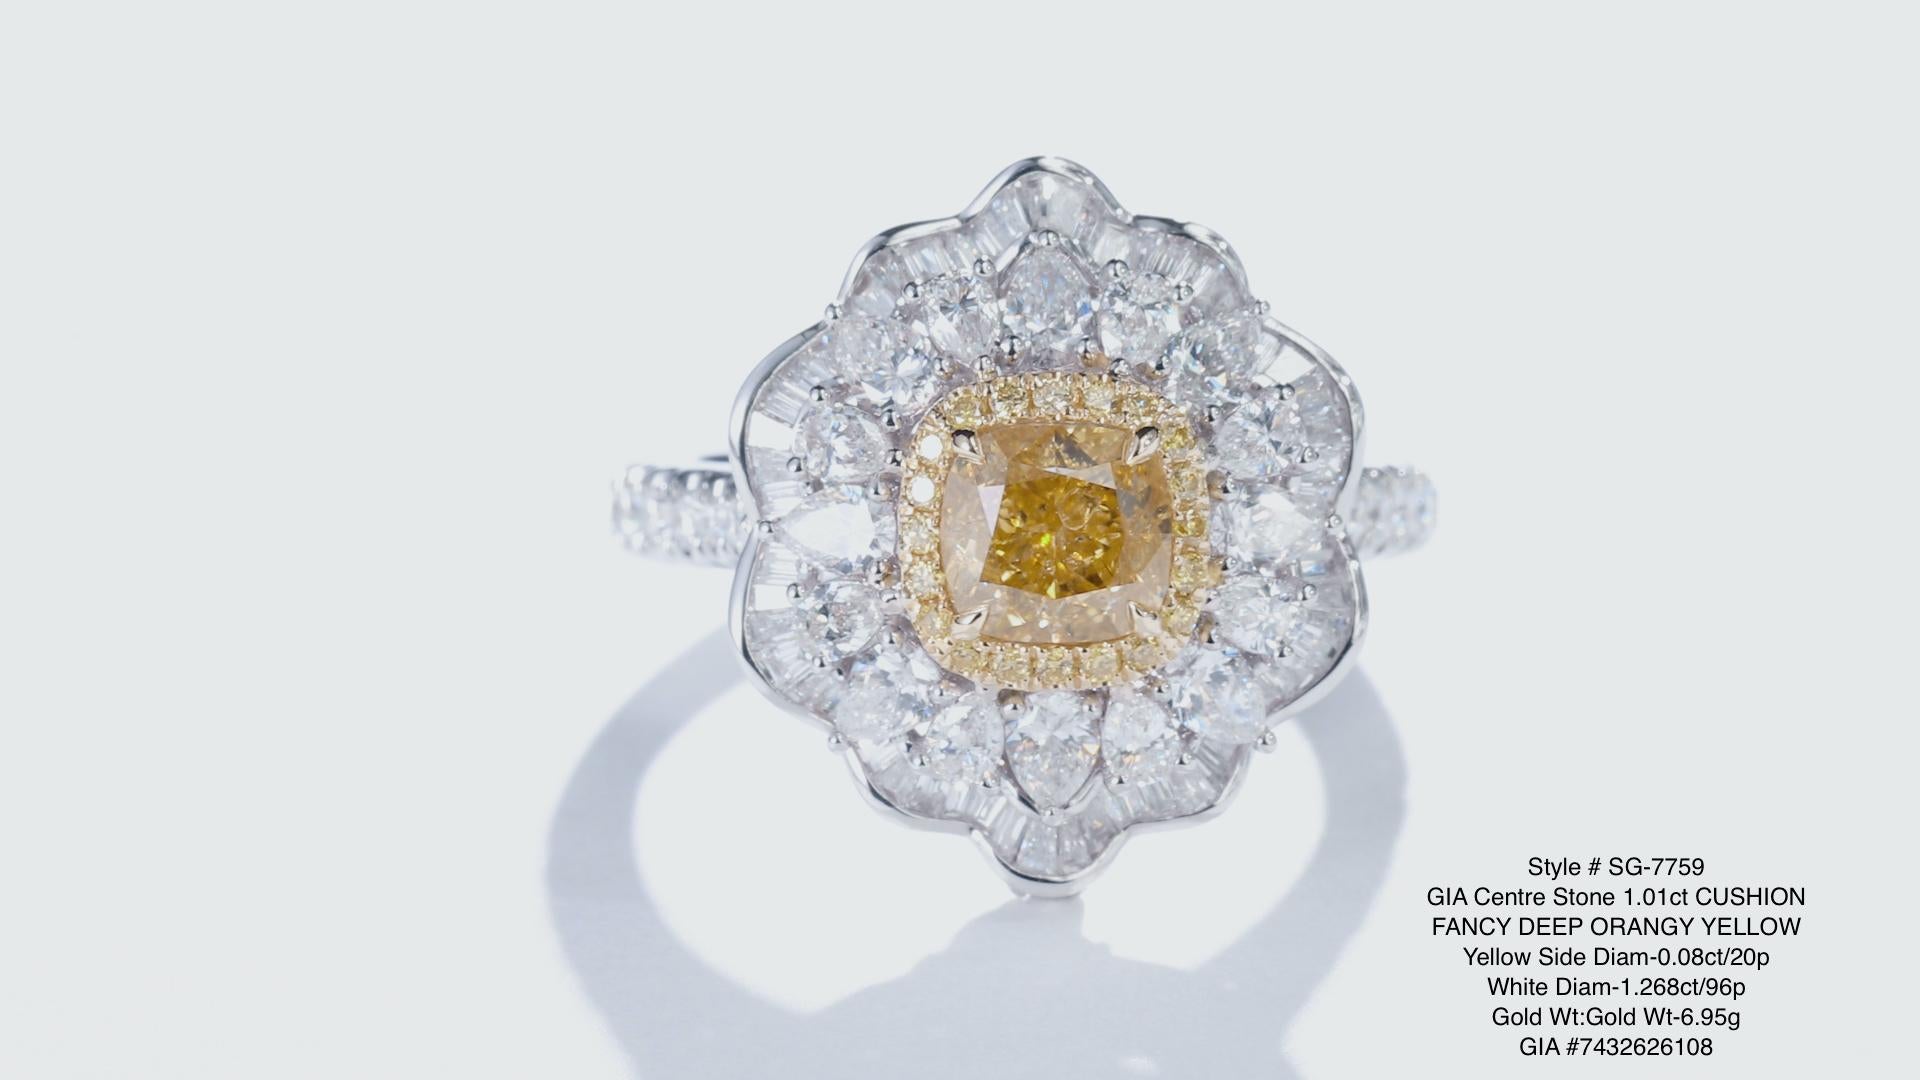 Introducing a radiant addition to our exclusive Summer Collection, behold the captivating beauty of this 1.01ct Fancy Deep Orangy Yellow cushion-shaped diamond ring. Mounted on a luxurious 18kt gold setting, this exquisite gem emanates warmth and